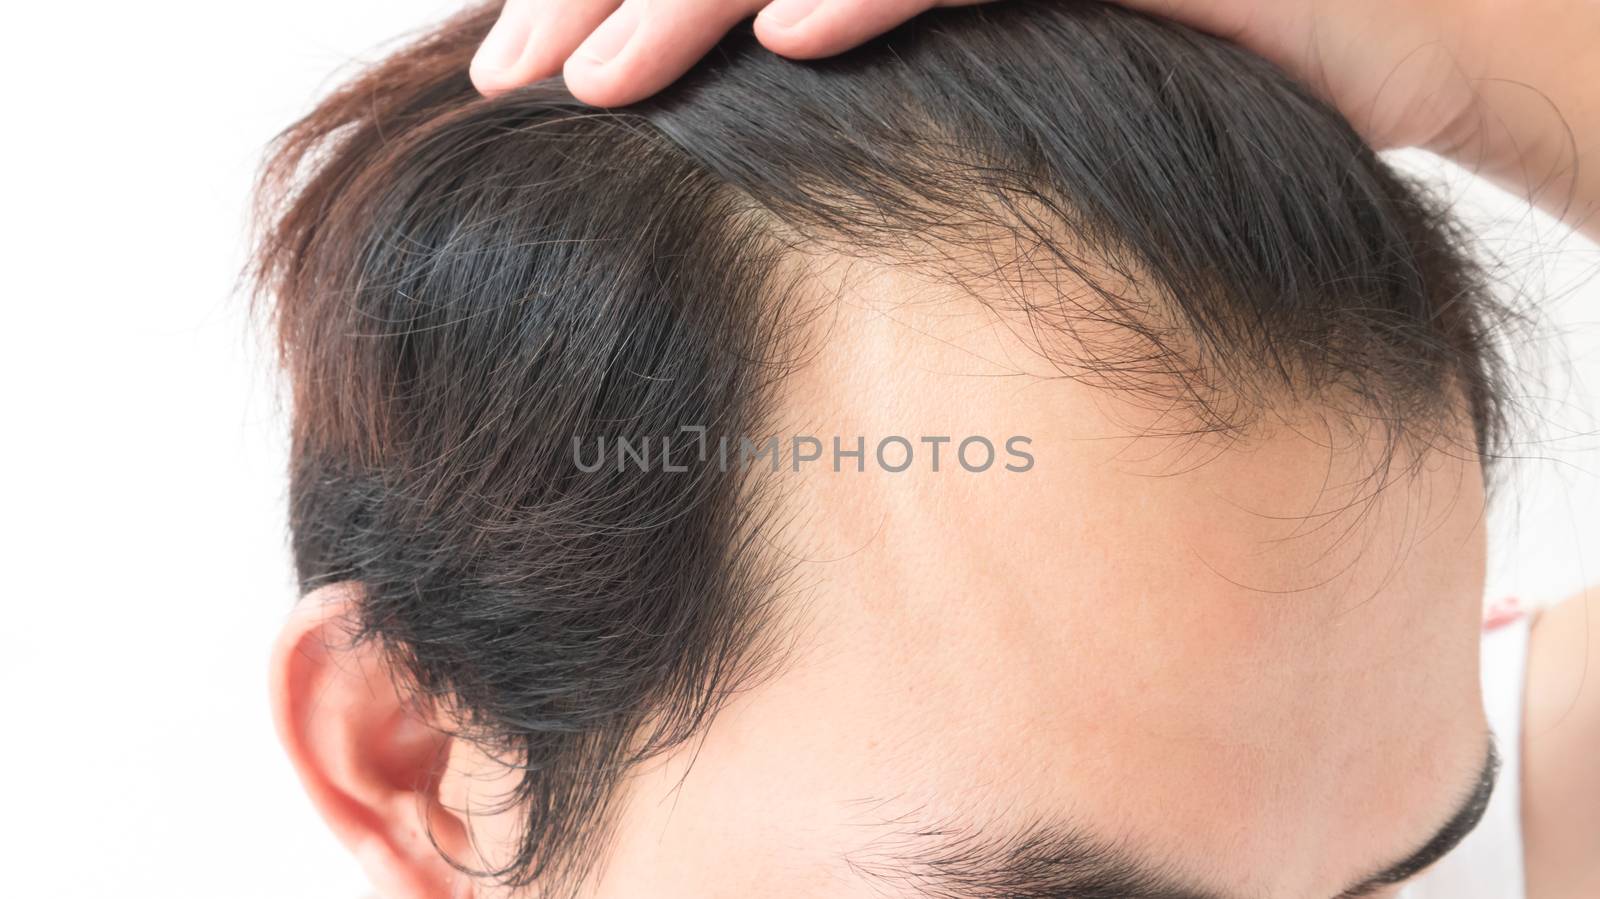 Young man serious hair loss problem for health care shampoo and beauty product concep